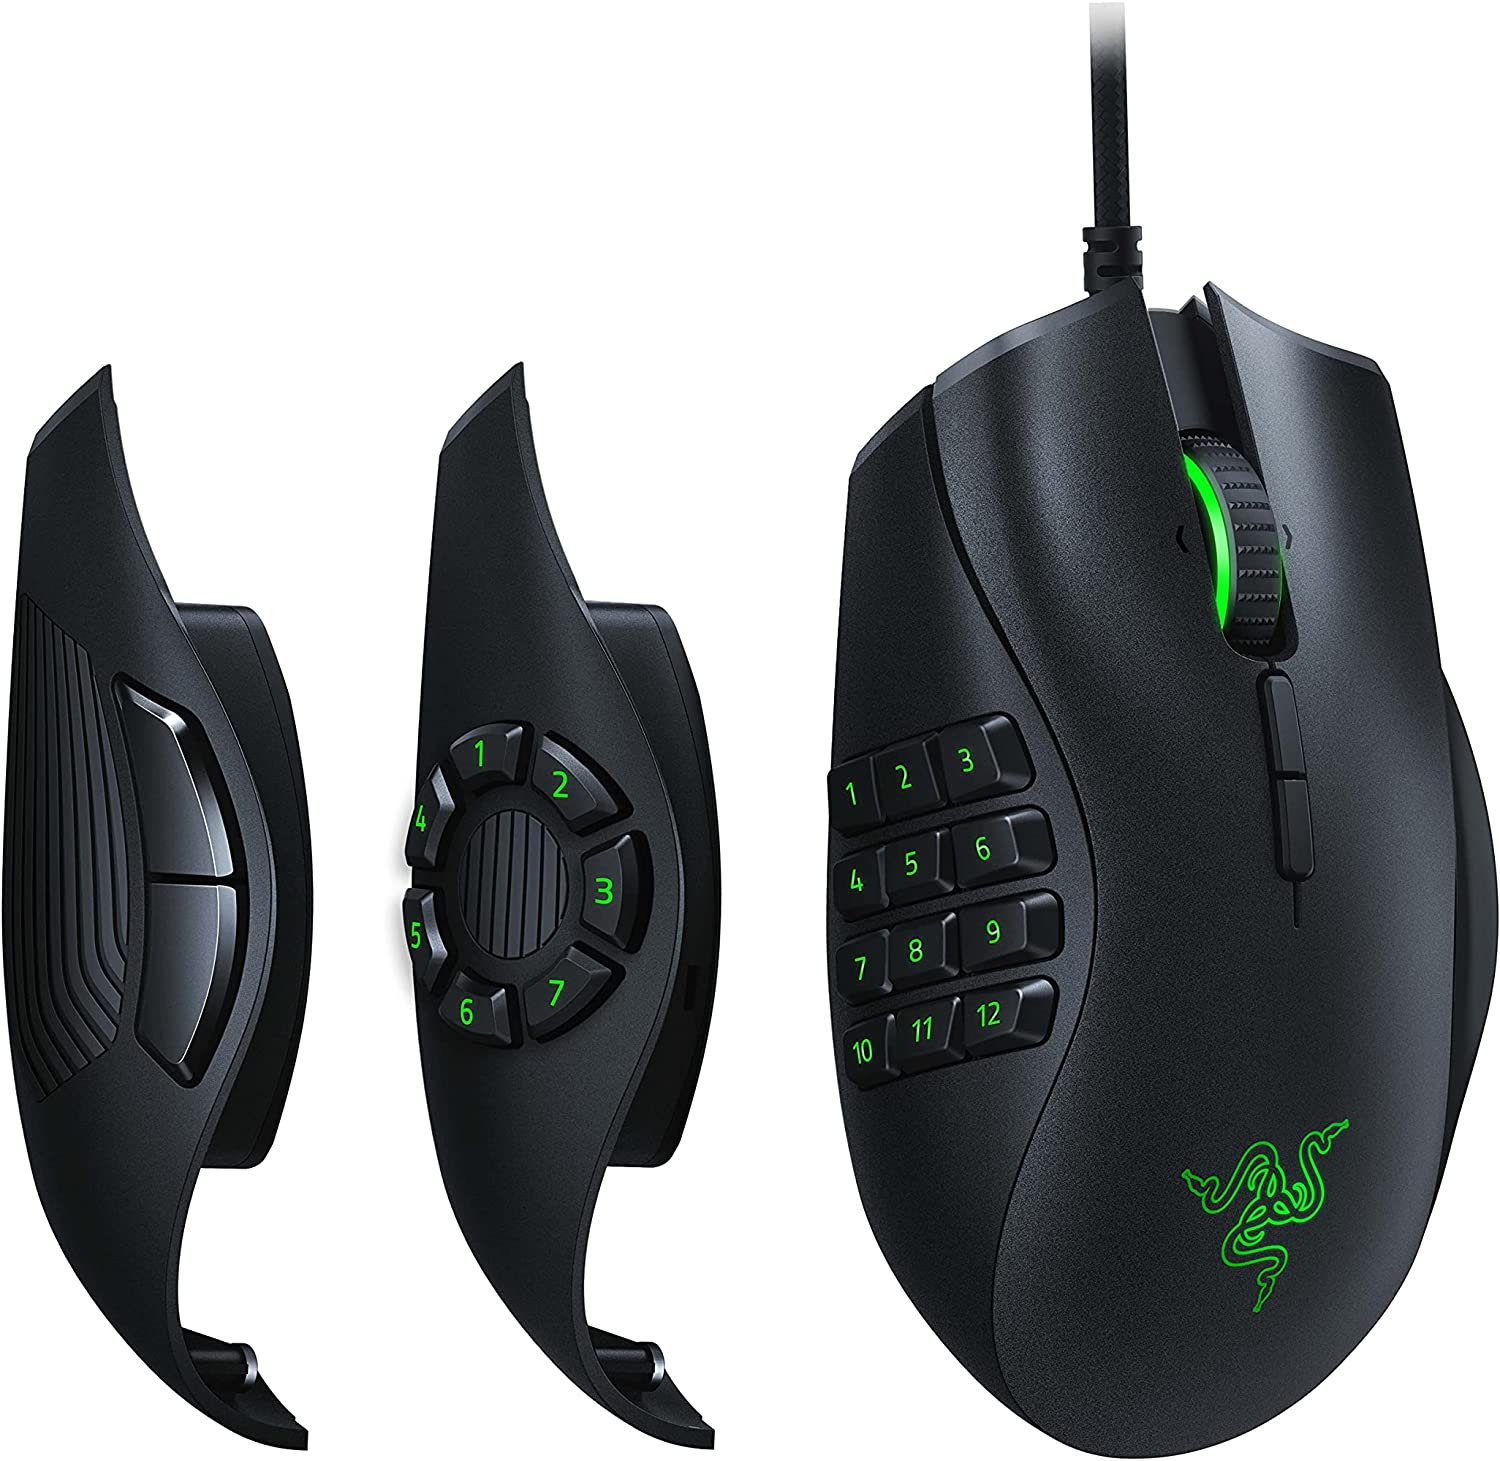 Image for The Razer Naga Trinity wired gaming mouse is enjoying £50 off this Cyber Monday